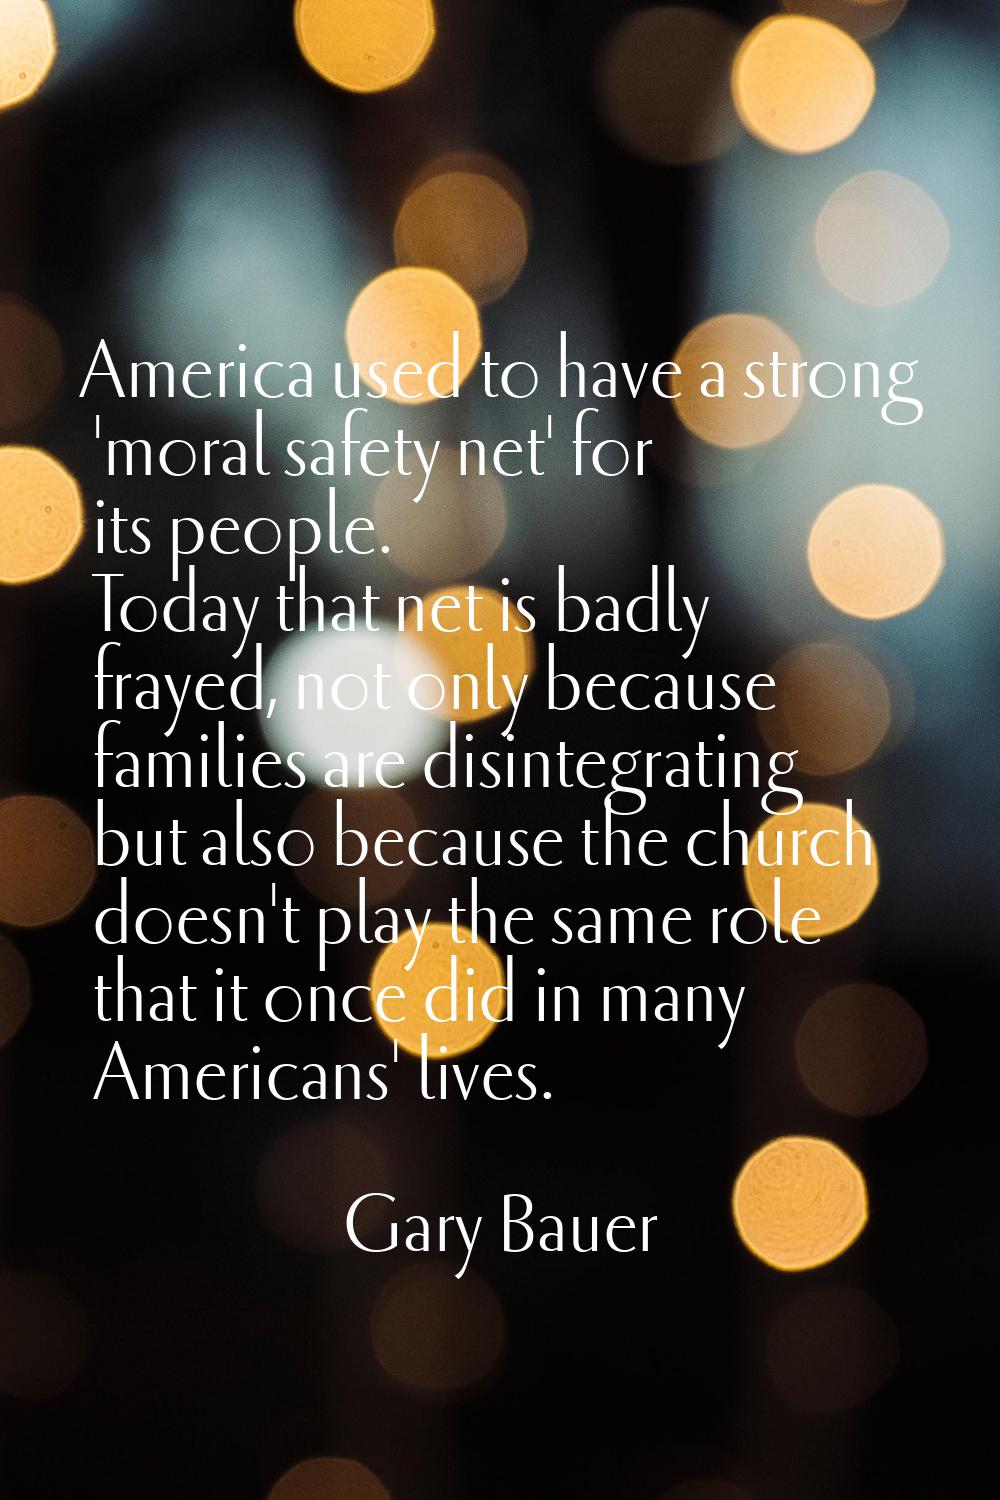 America used to have a strong 'moral safety net' for its people. Today that net is badly frayed, no